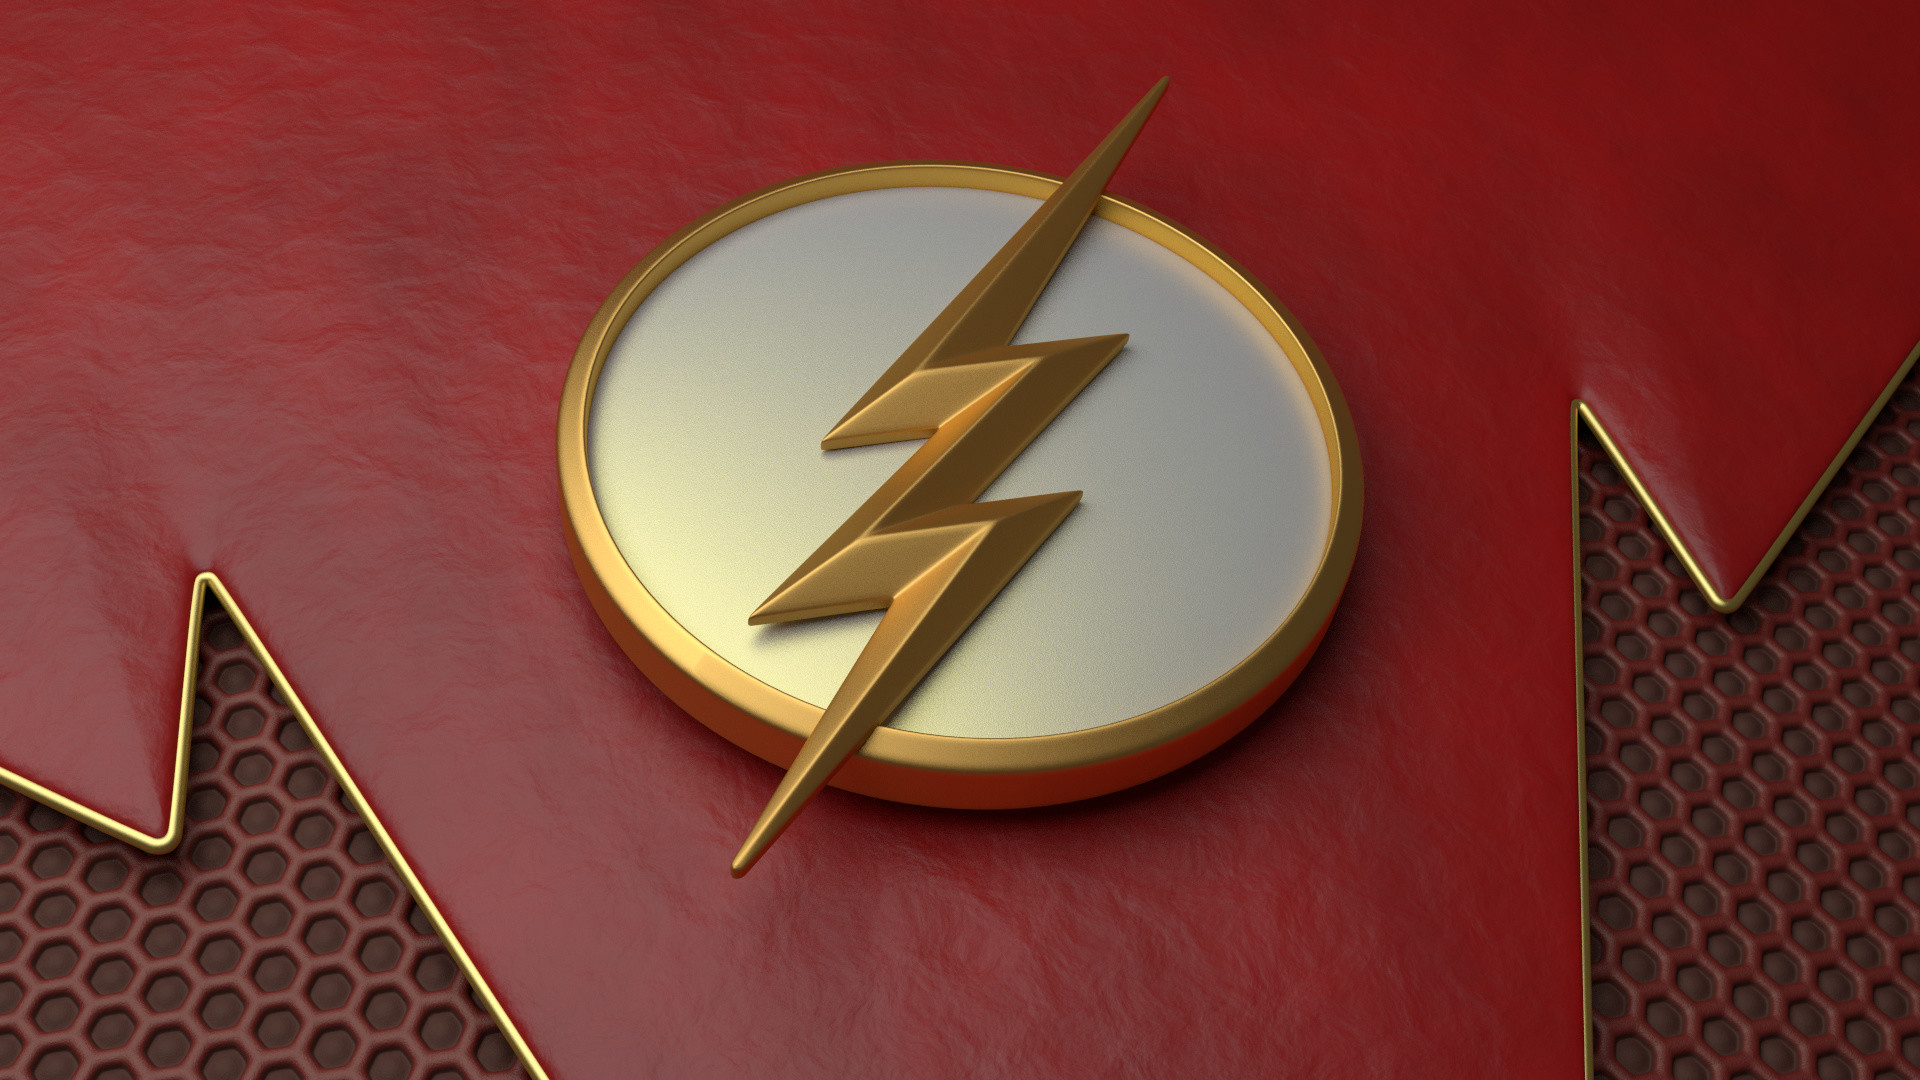 1920x1080 ... The Flash Symbol Wallpapers (42 Wallpapers) Adorable Wallpaper